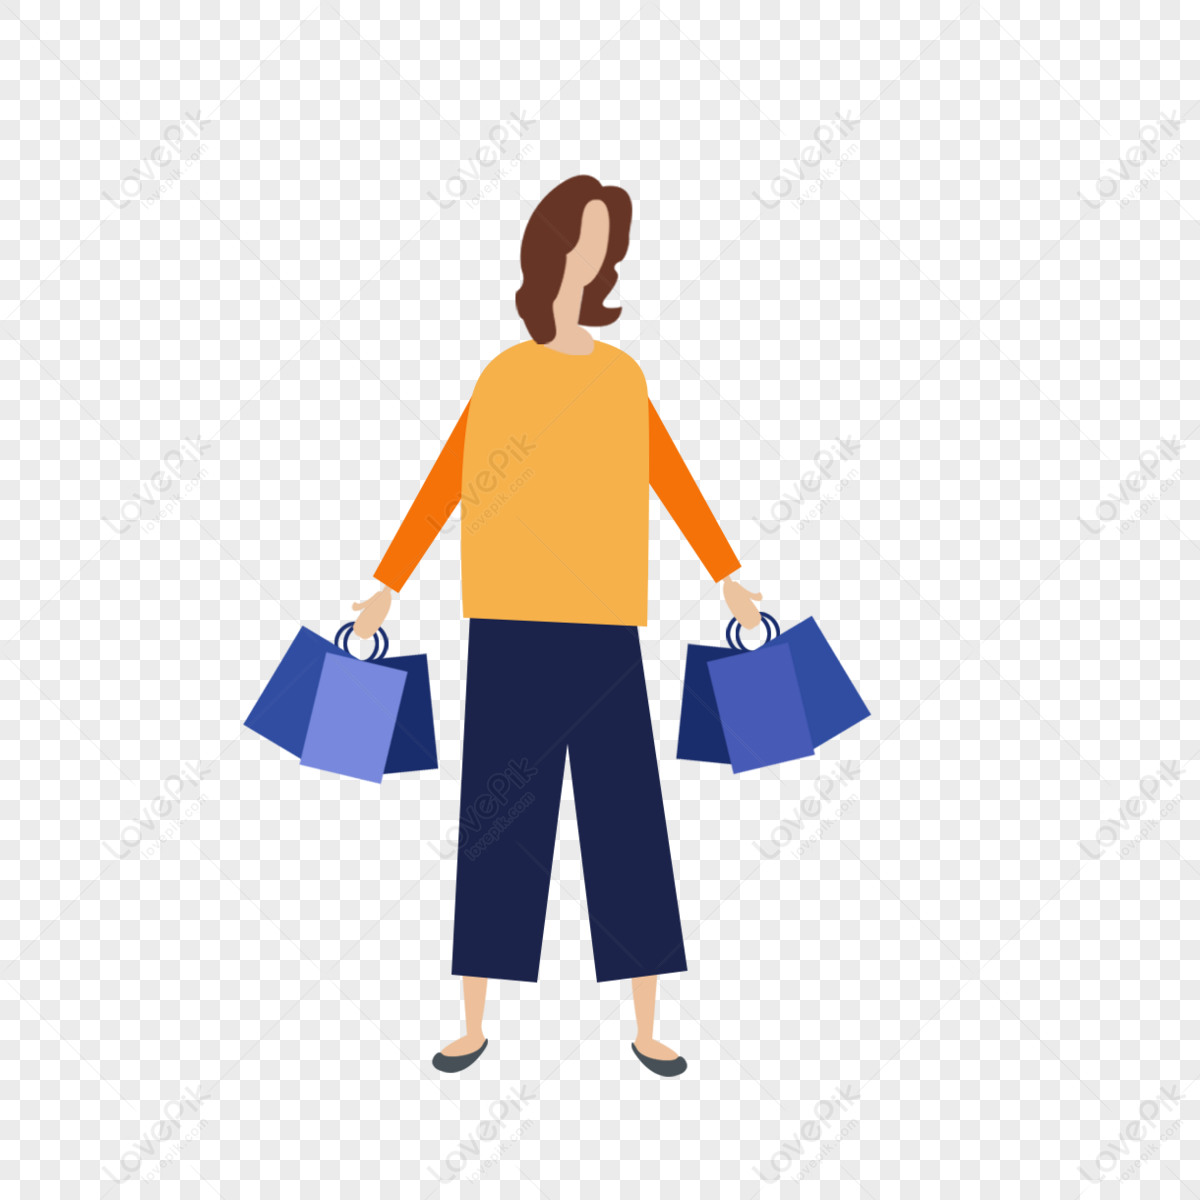 Cartoon Shopping Bag Clipart Transparent PNG Hd, Cartoon Shopping Bag Free  Illustration, Fashion Shopping Bags, Packaging, Clothes Bags PNG Image For  Free Downl…